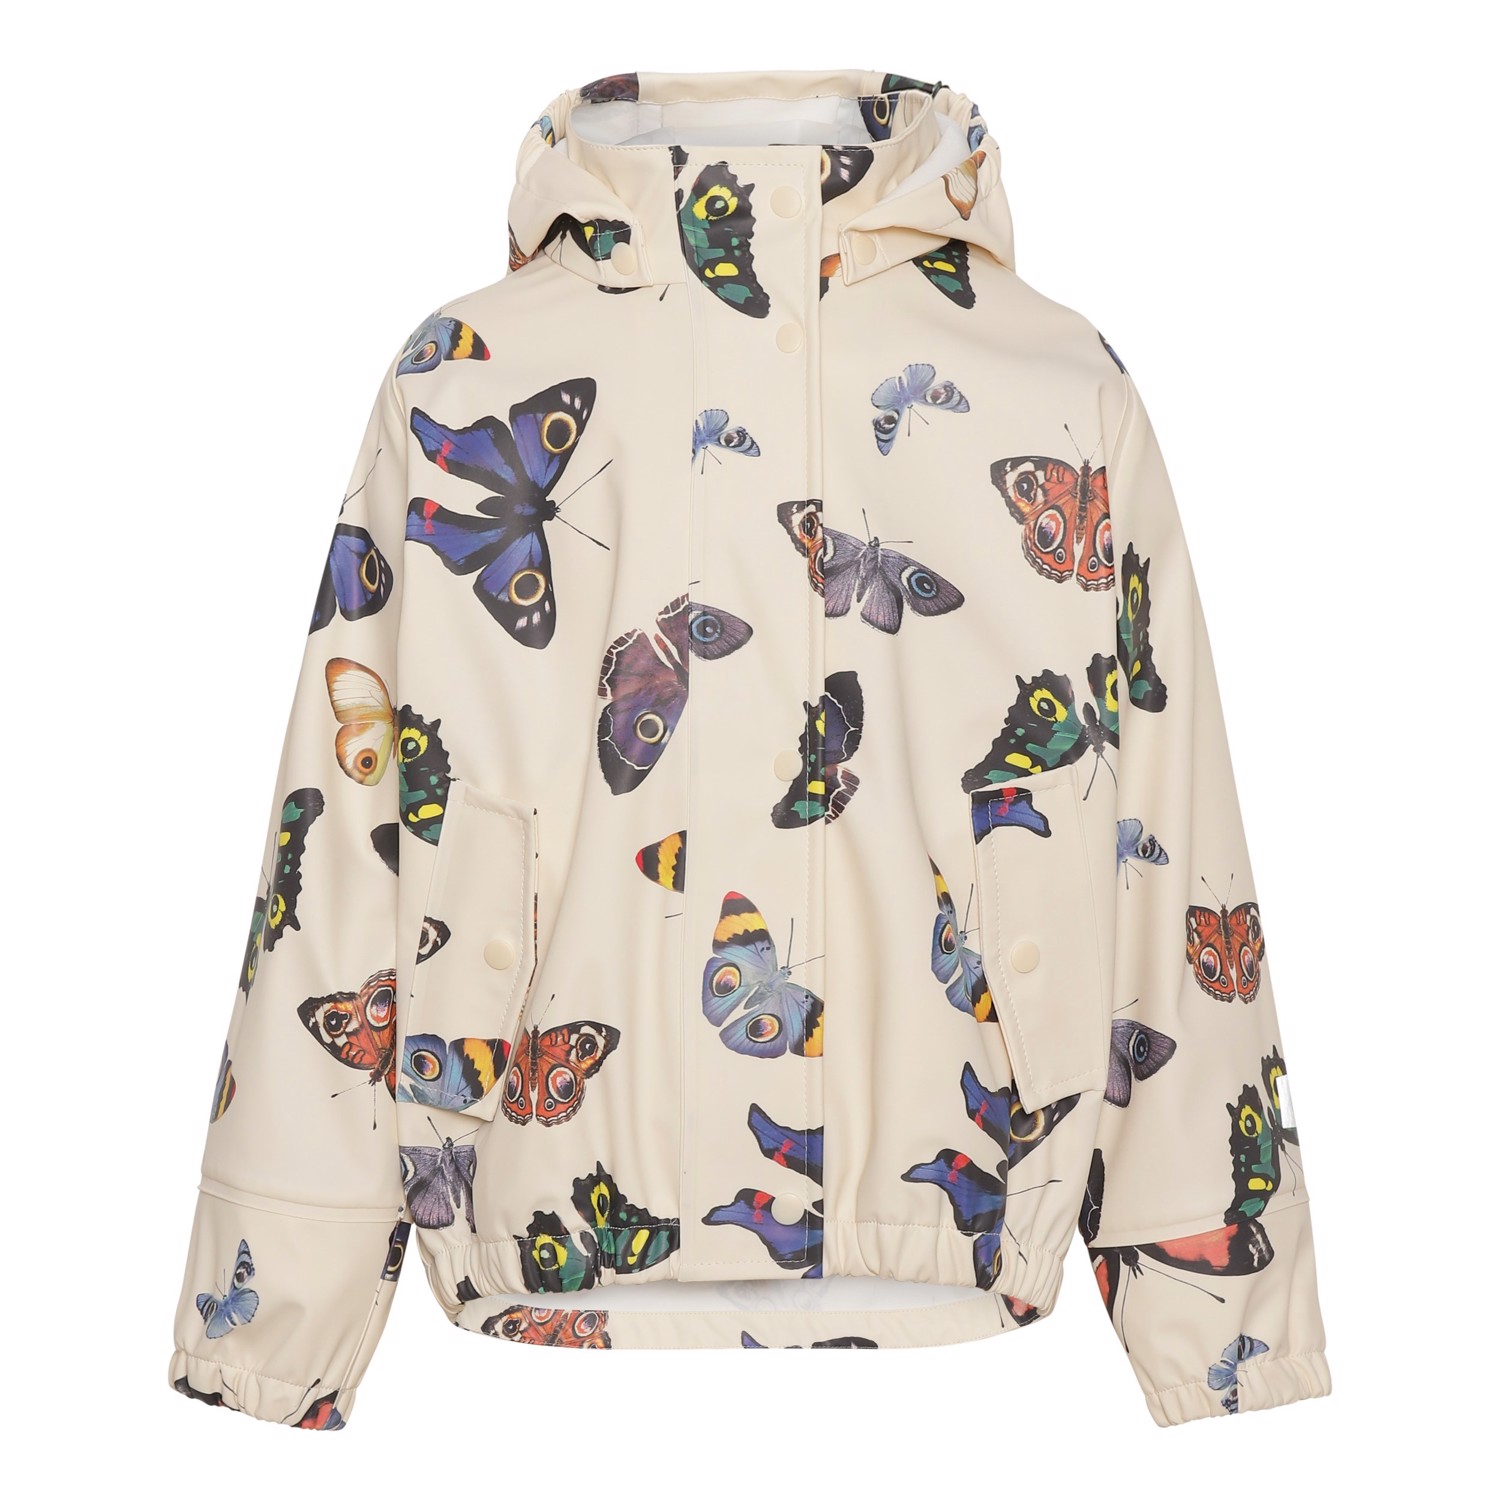 Zan - I See You Ivory - Recycled rubber rain jacket in a butterfly print 